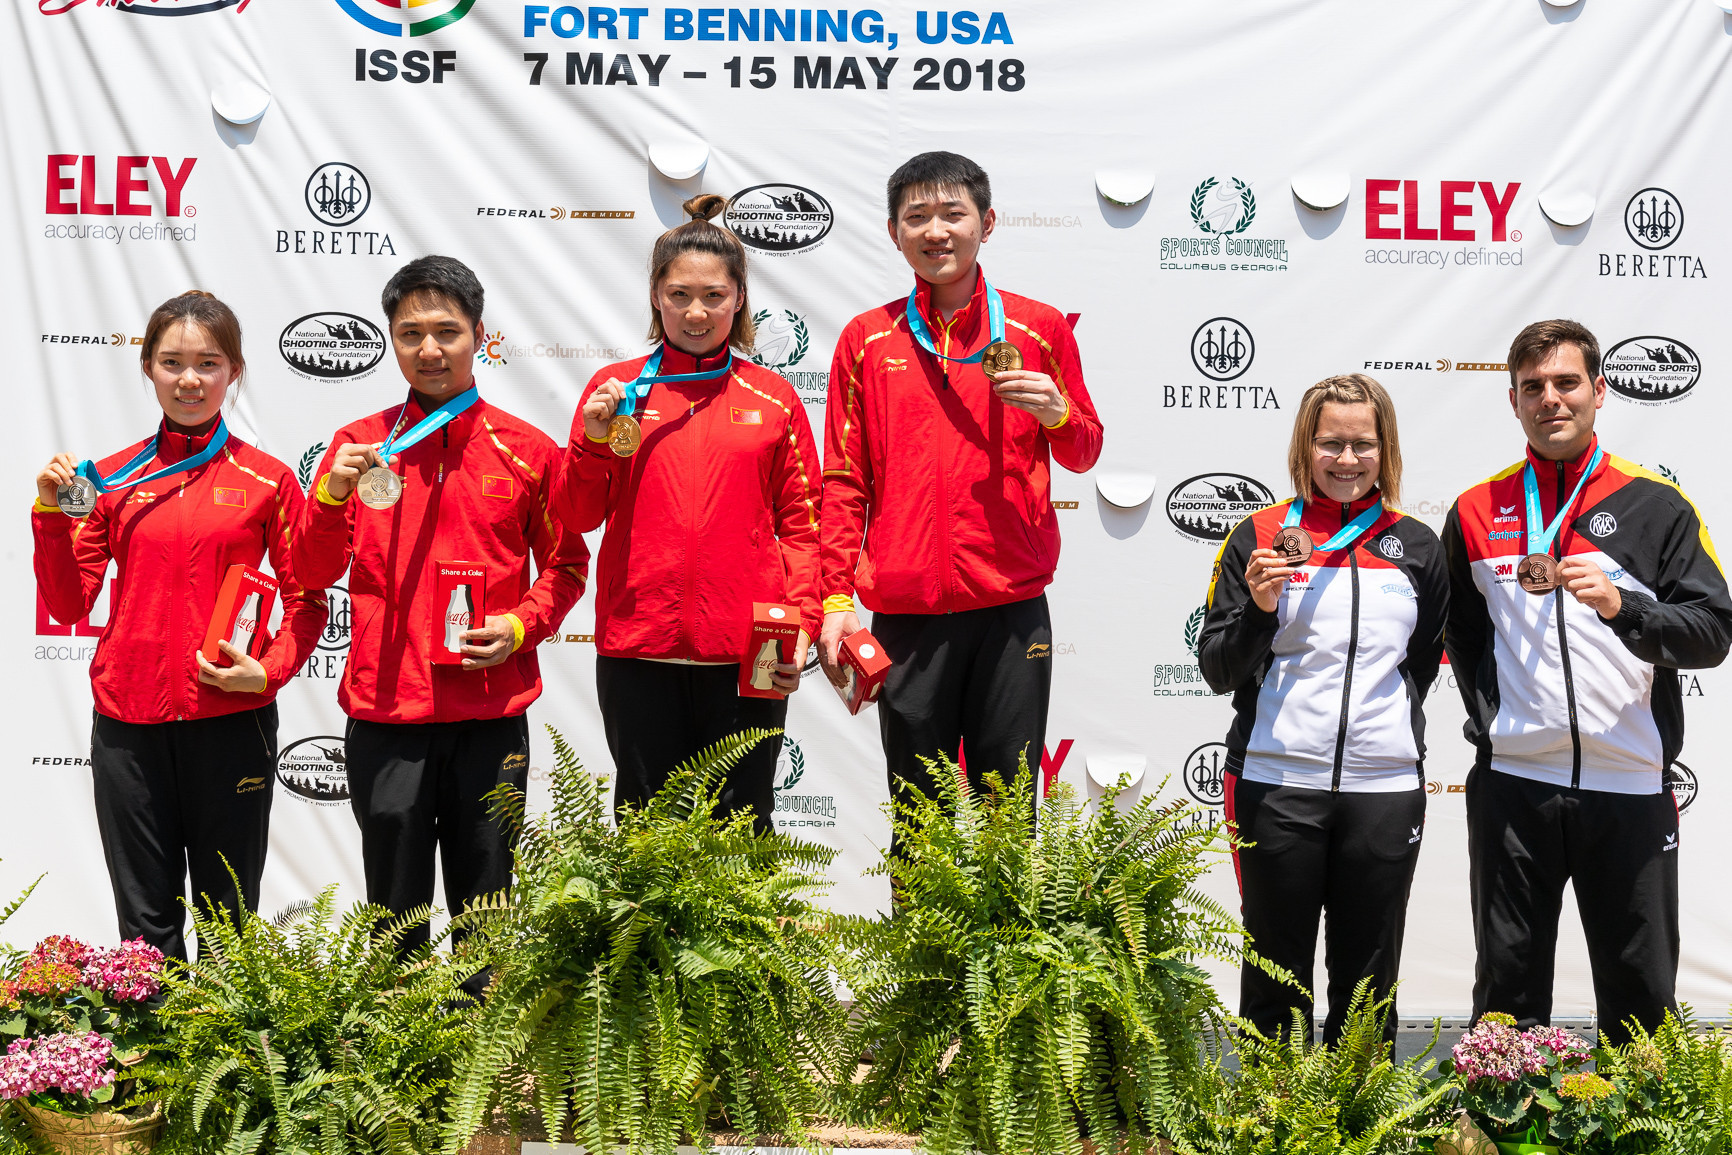 China finished top of the medal table in Fort Benning following another gold on the final day ©ISSF